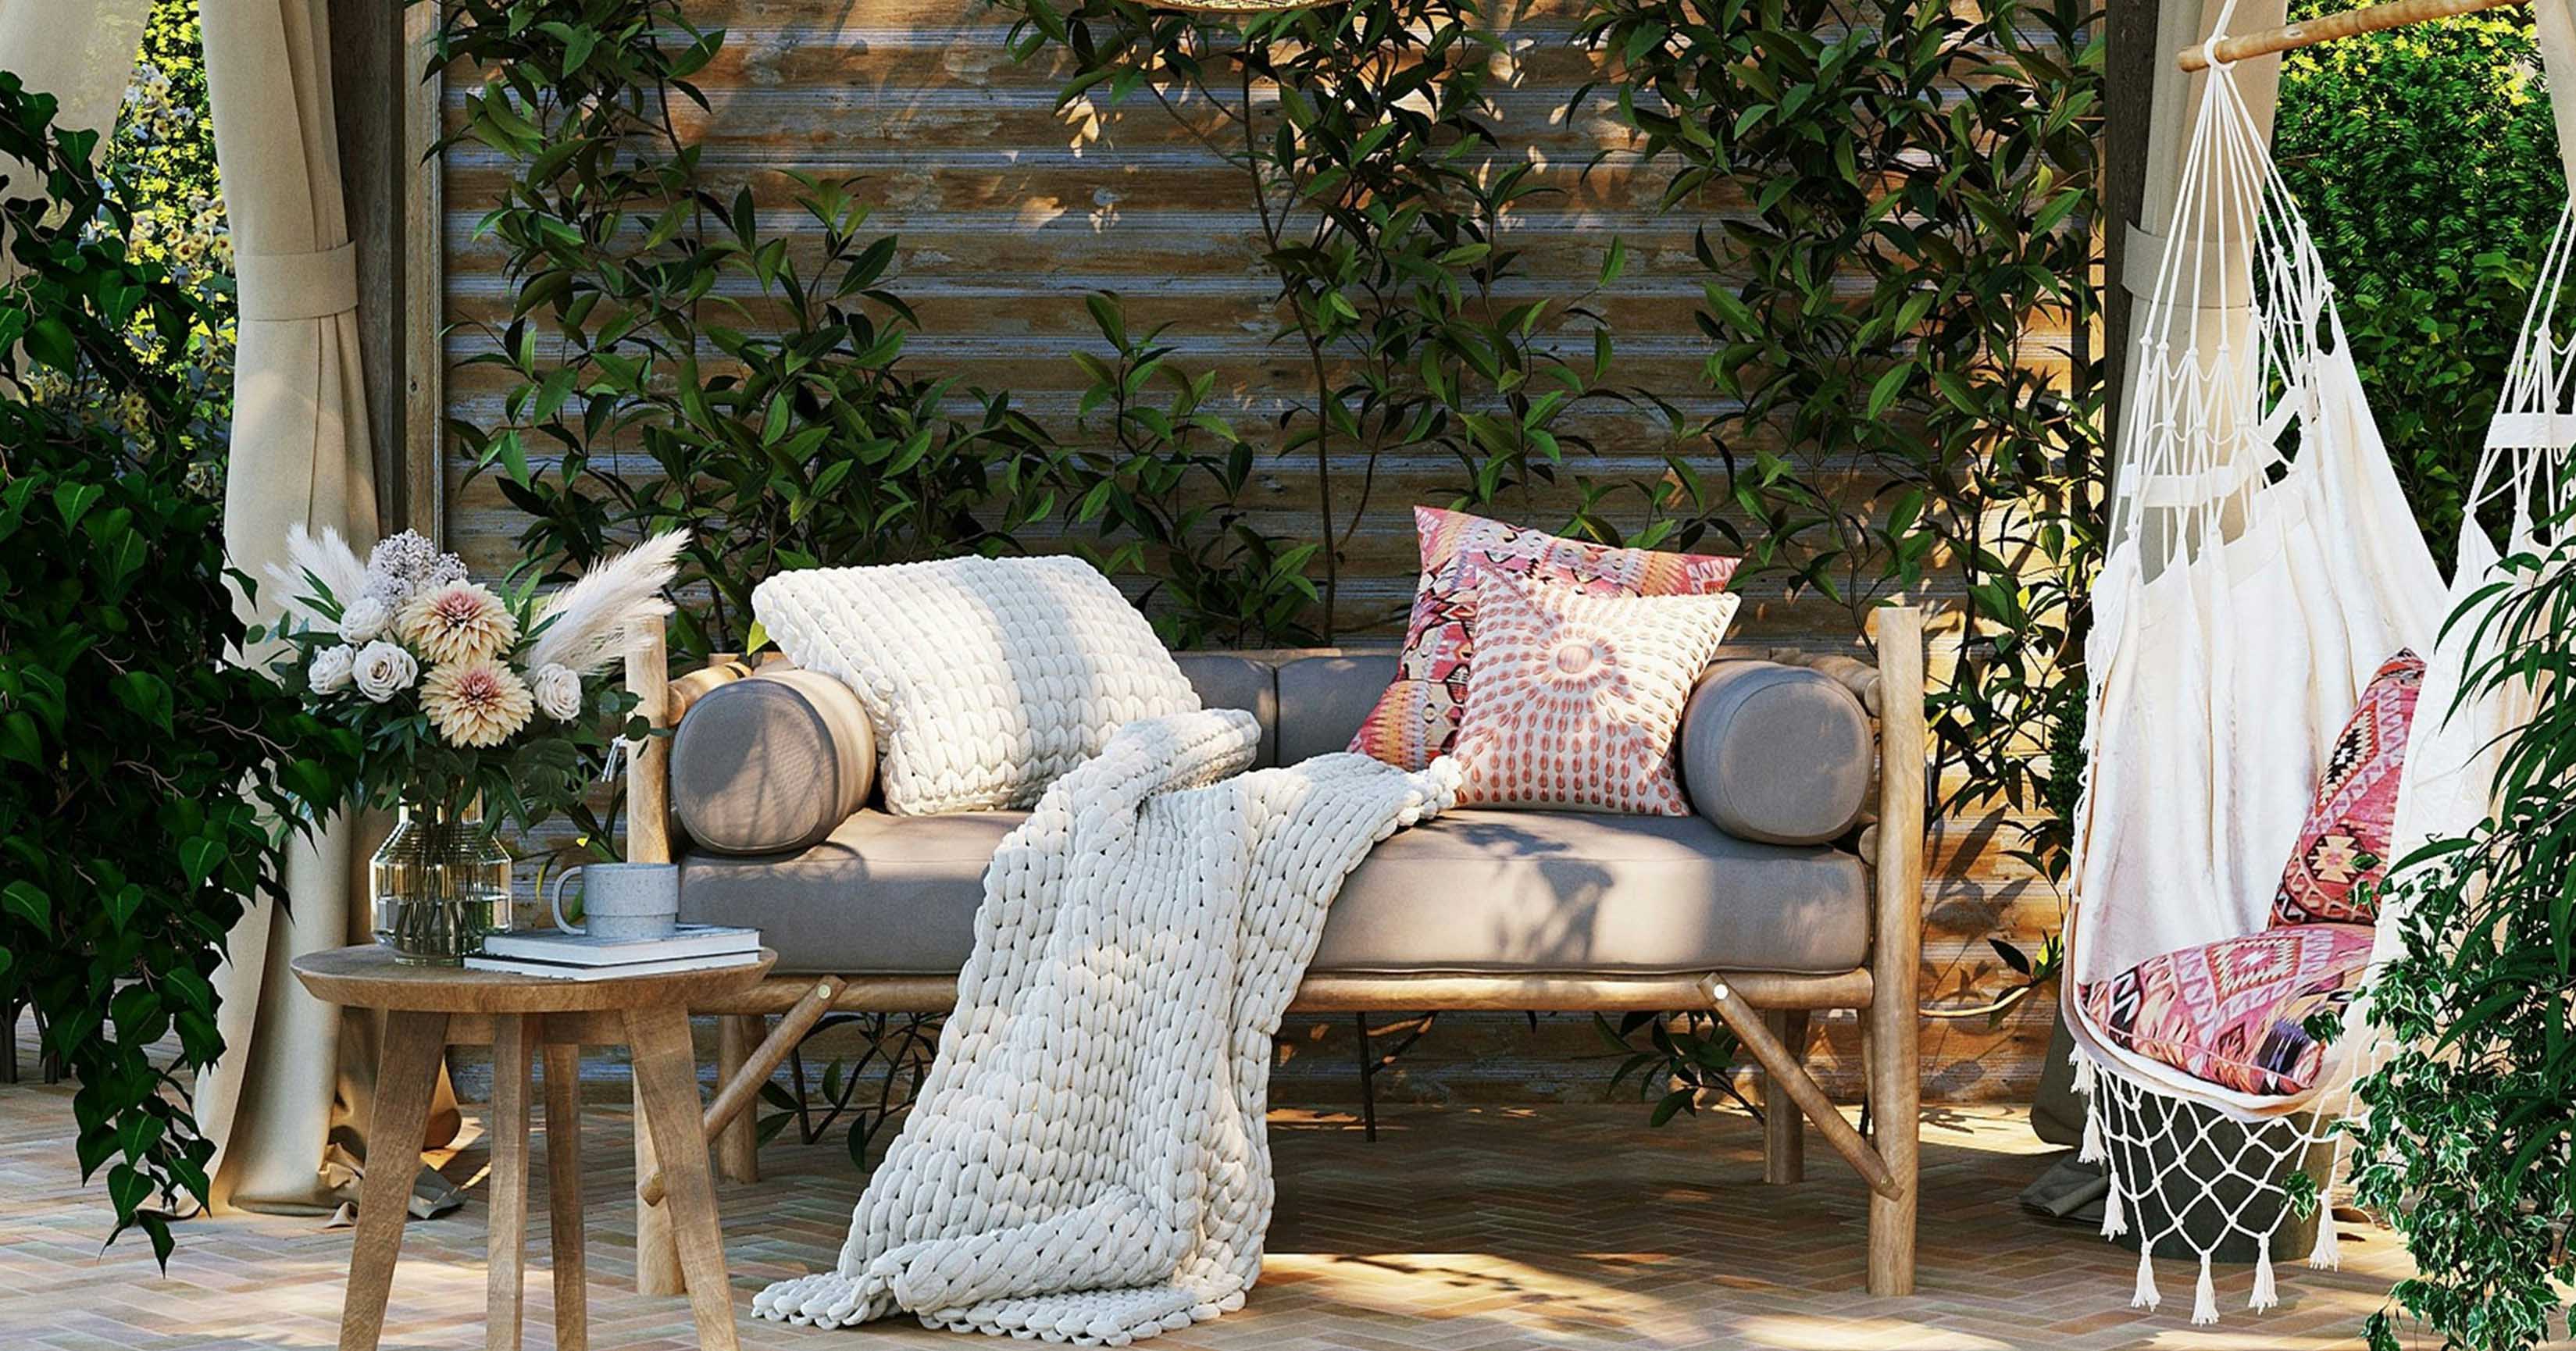 Outdoor setting with a boho style couch with throw cushions and throw rug with a white hammock with red cushions on the right side of the image.